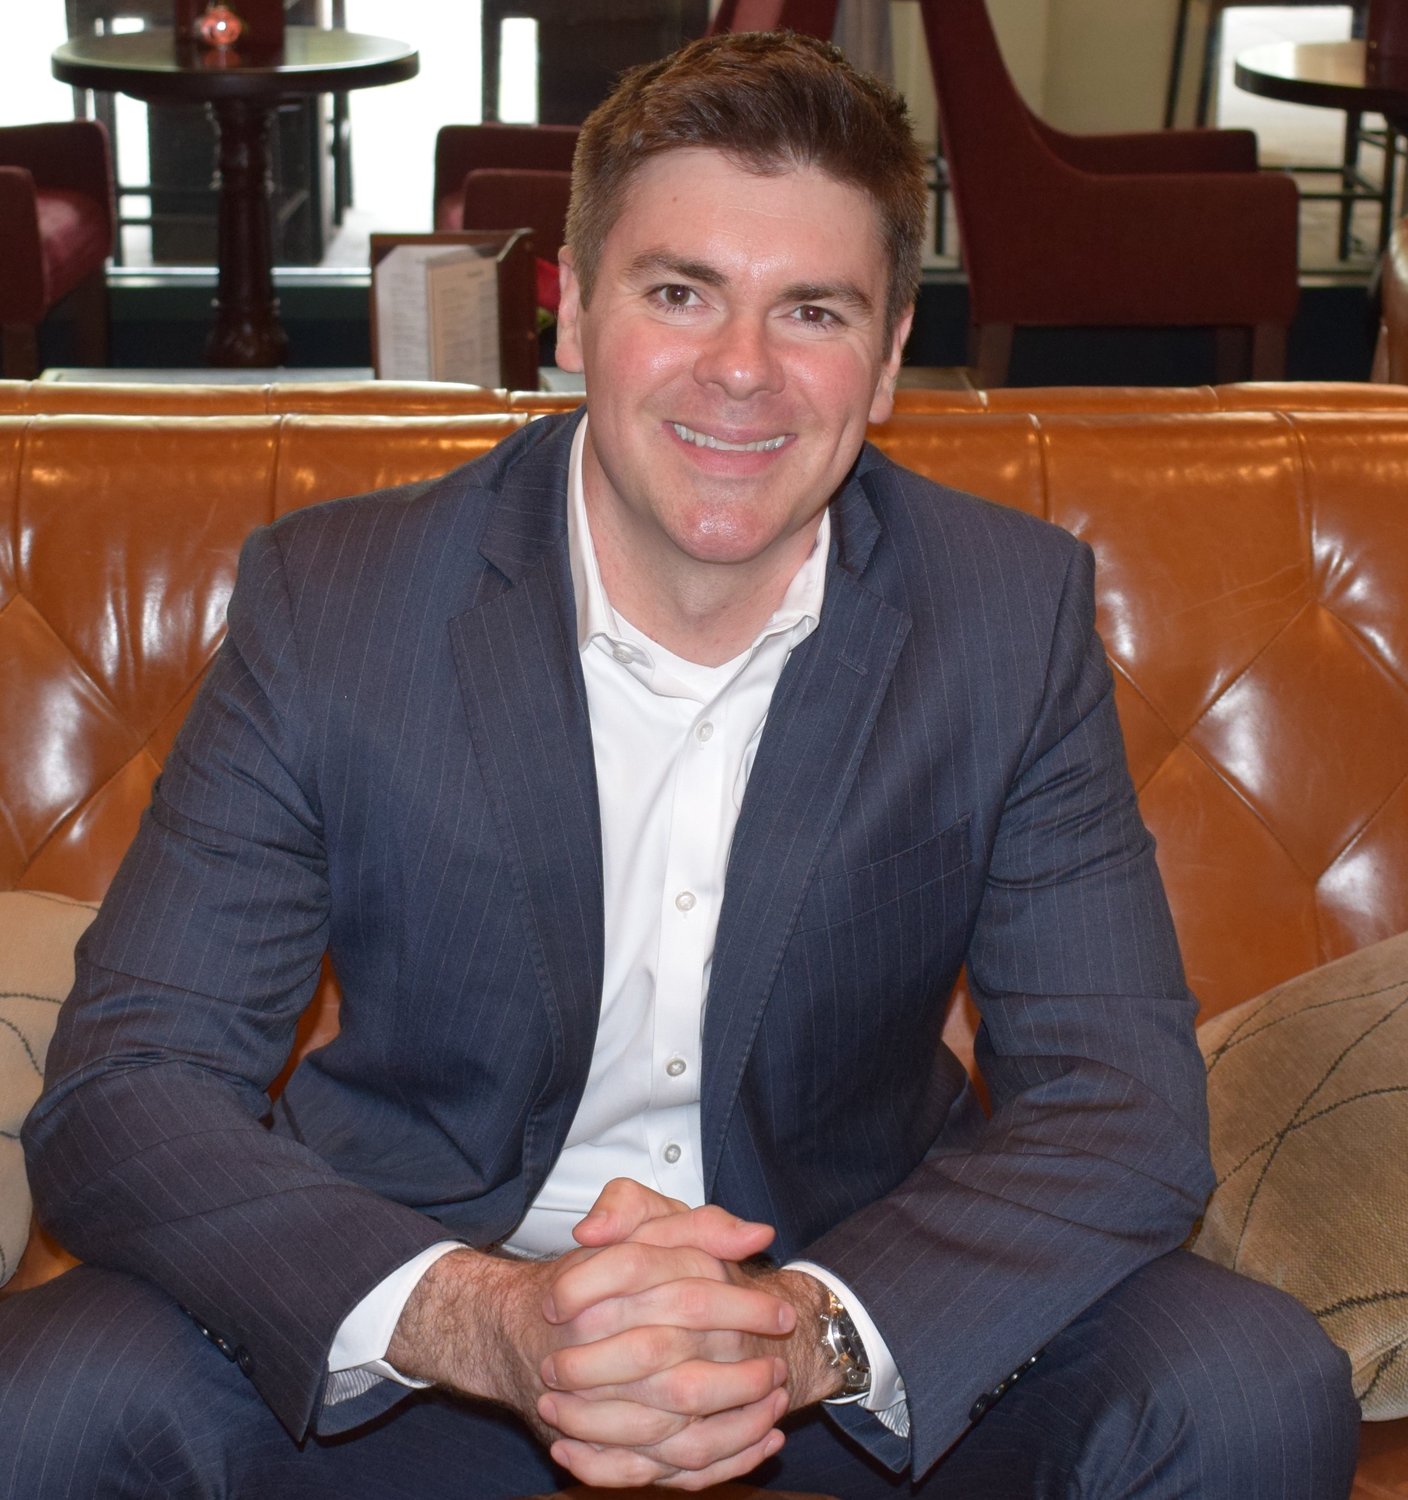 Christopher Connors, a 1999 South Side High School graduate, became a full-time entrepreneur as a writer, executive coach and speaker in 2018, after he realized he was unhappy working in the corporate world.